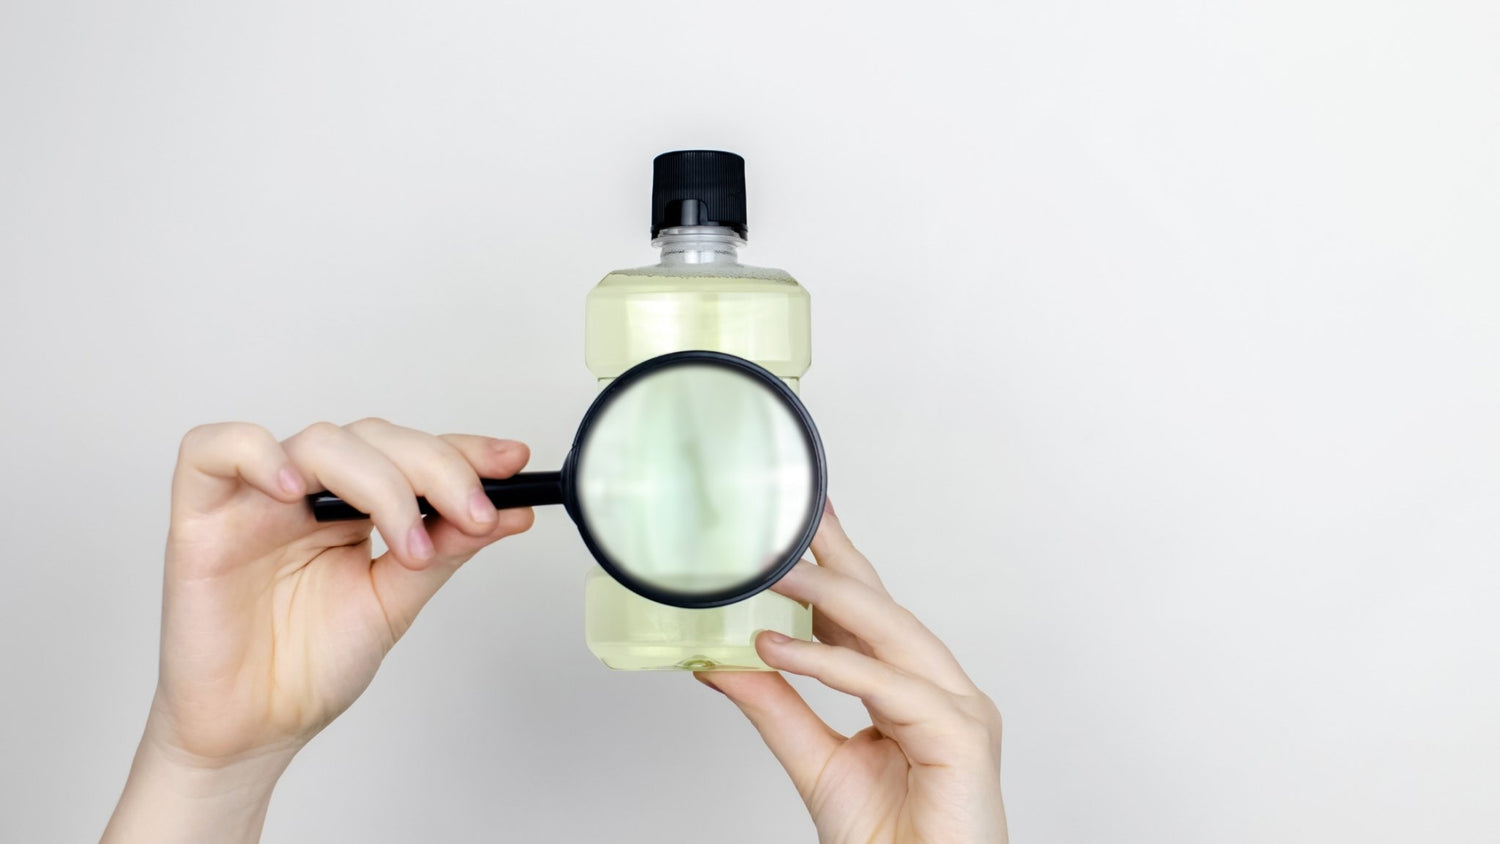 Natural mouthwash: Does it work? - truthpaste